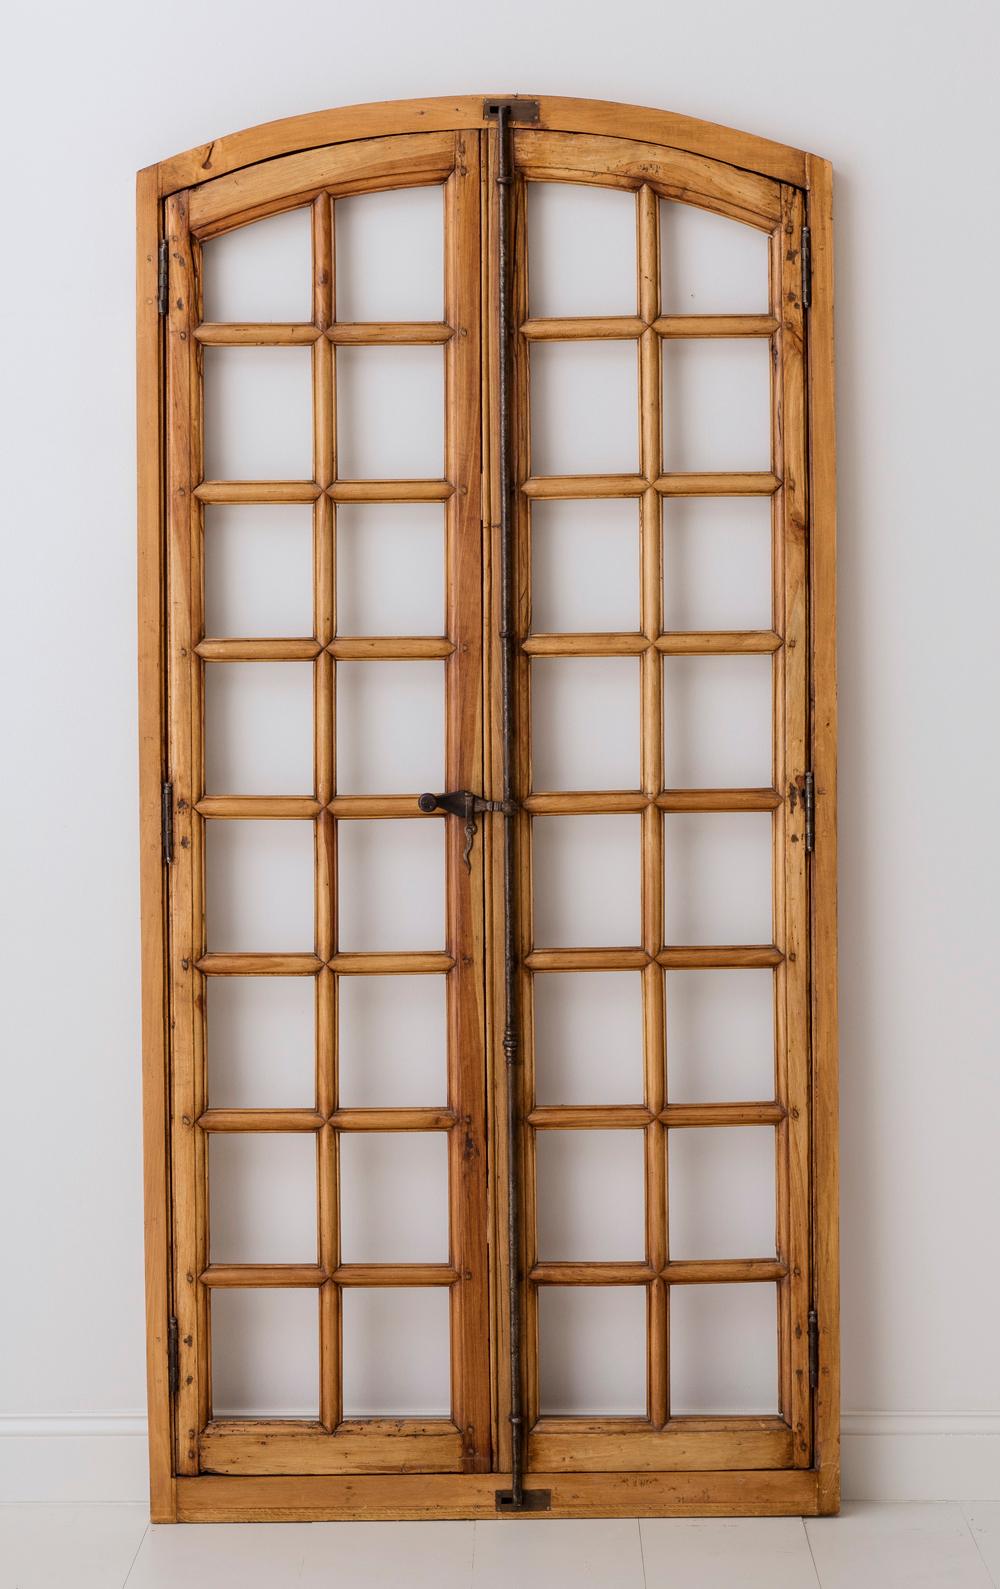 A 19th century French pair of arched double doors or windows with newly constructed frame and new hardware. Found in Provence. The doors / windows are pine and feature beautiful wood panes.  There is no glass in these doors.  They would be lovely